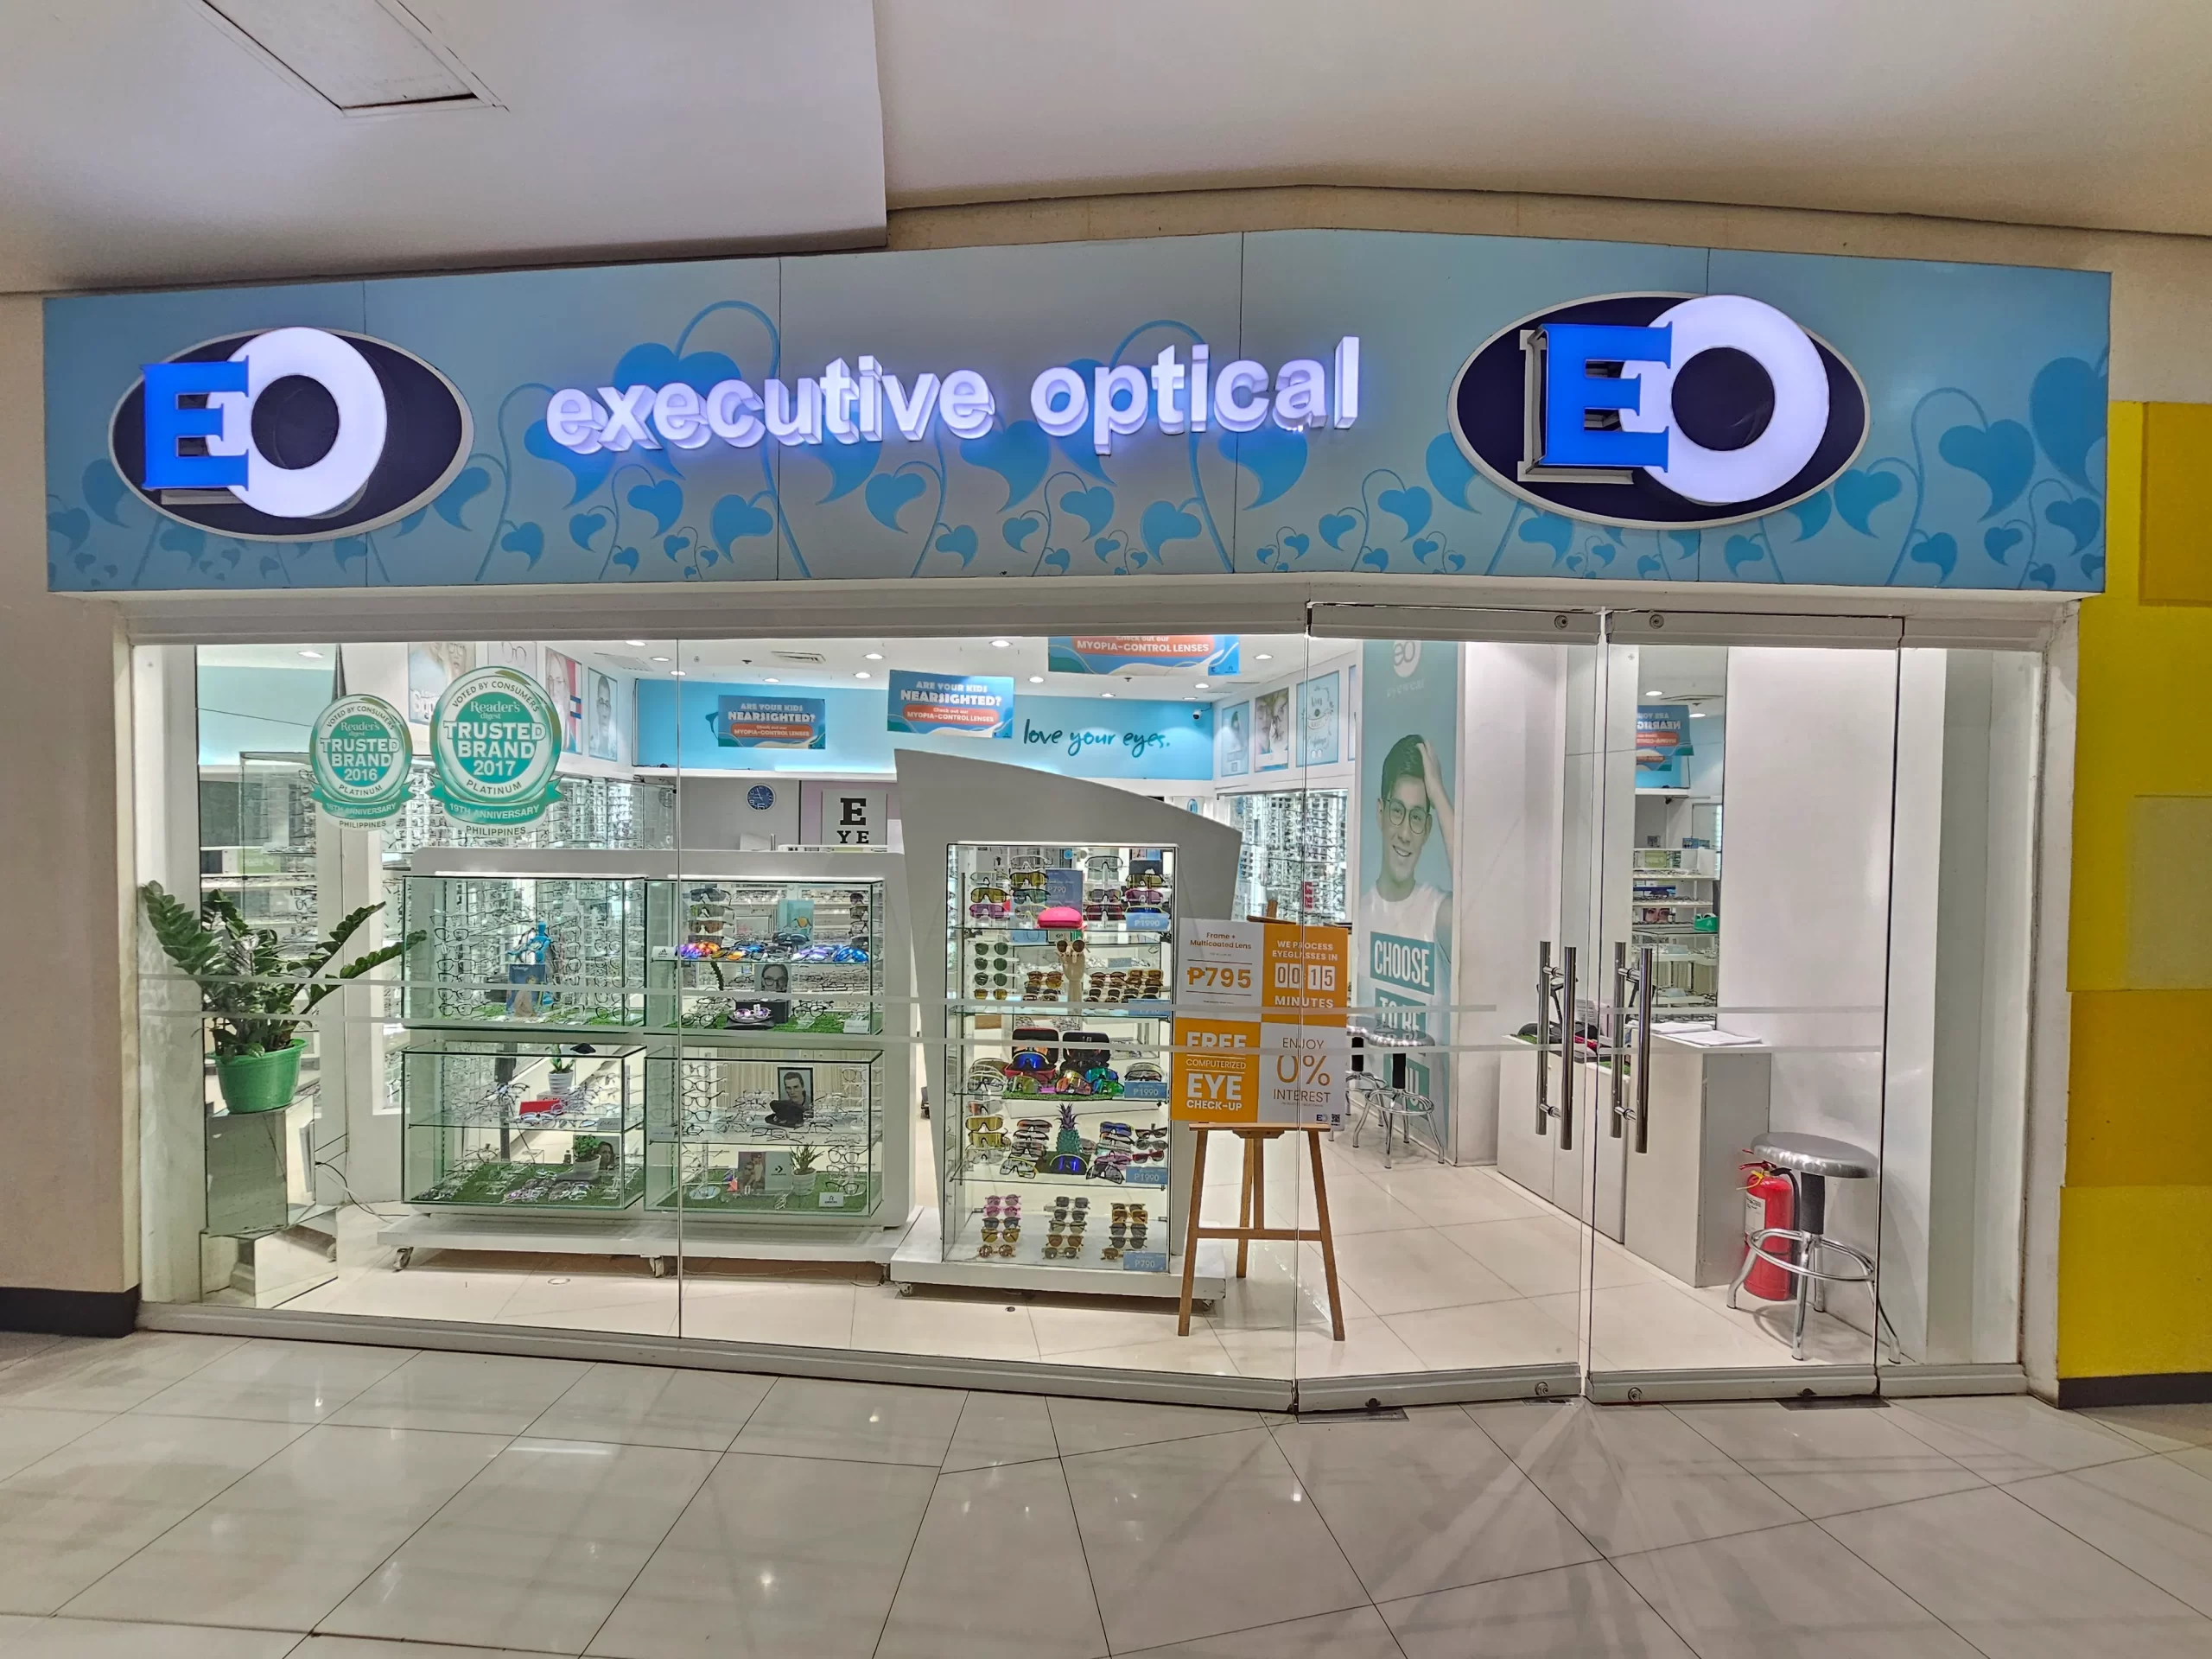 EO Manna Mall Branch - Sunglasses Eyeglasses and Contact Lenses